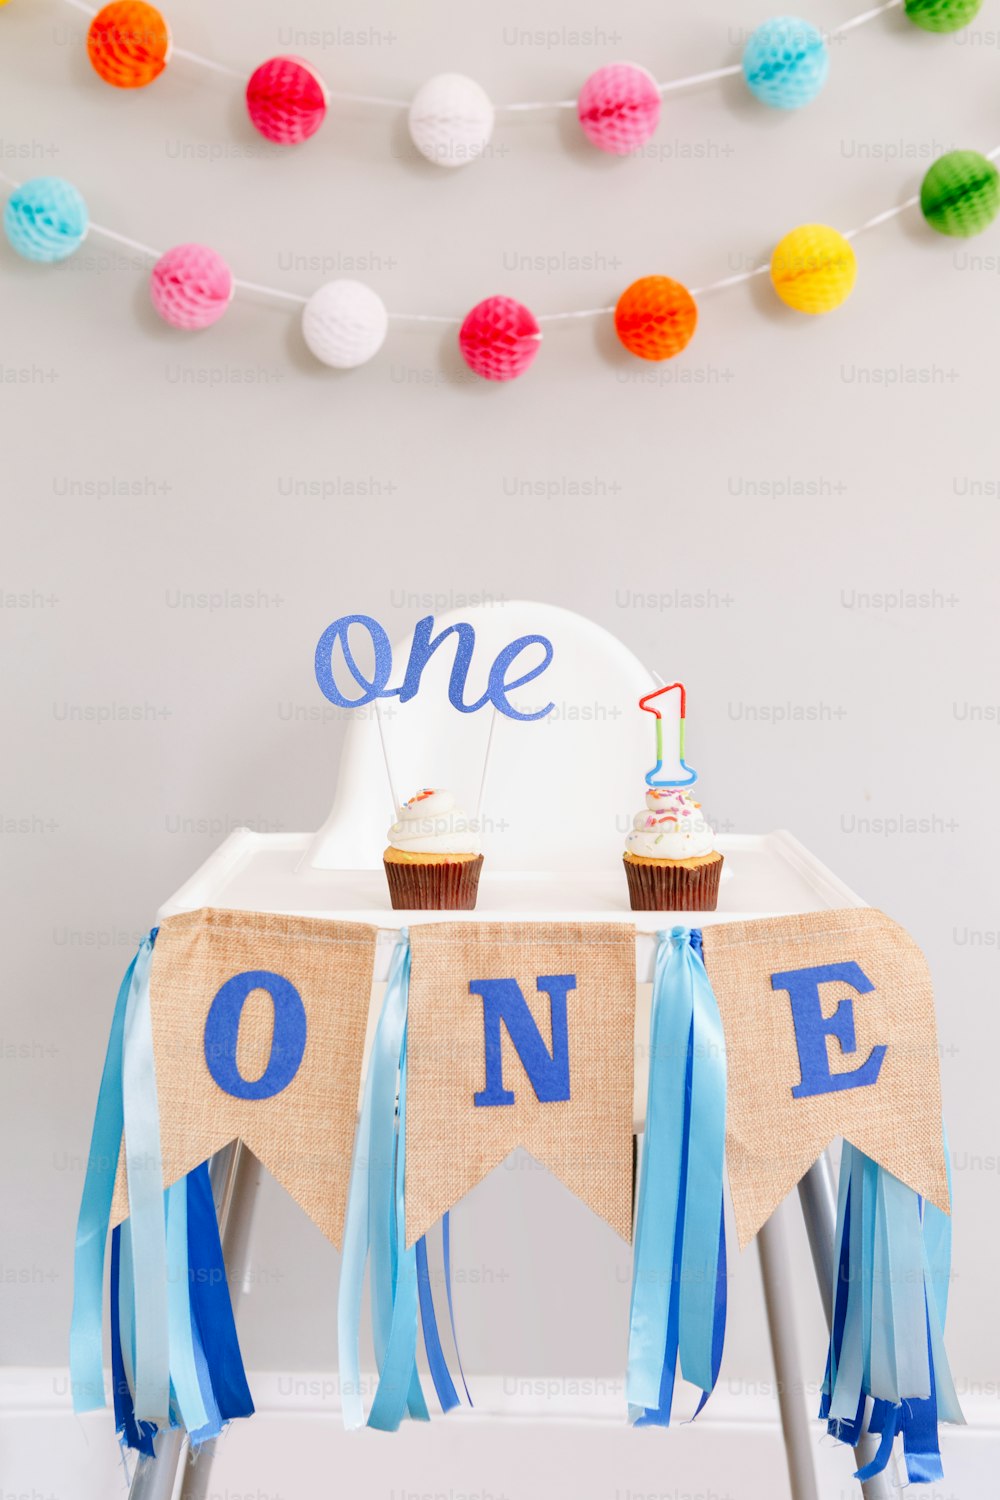 Festive background decoration for birthday celebration. Letters text one and one candle in small cupcakes for baby child birthday. Garland decoration on background. Cake smash first year.